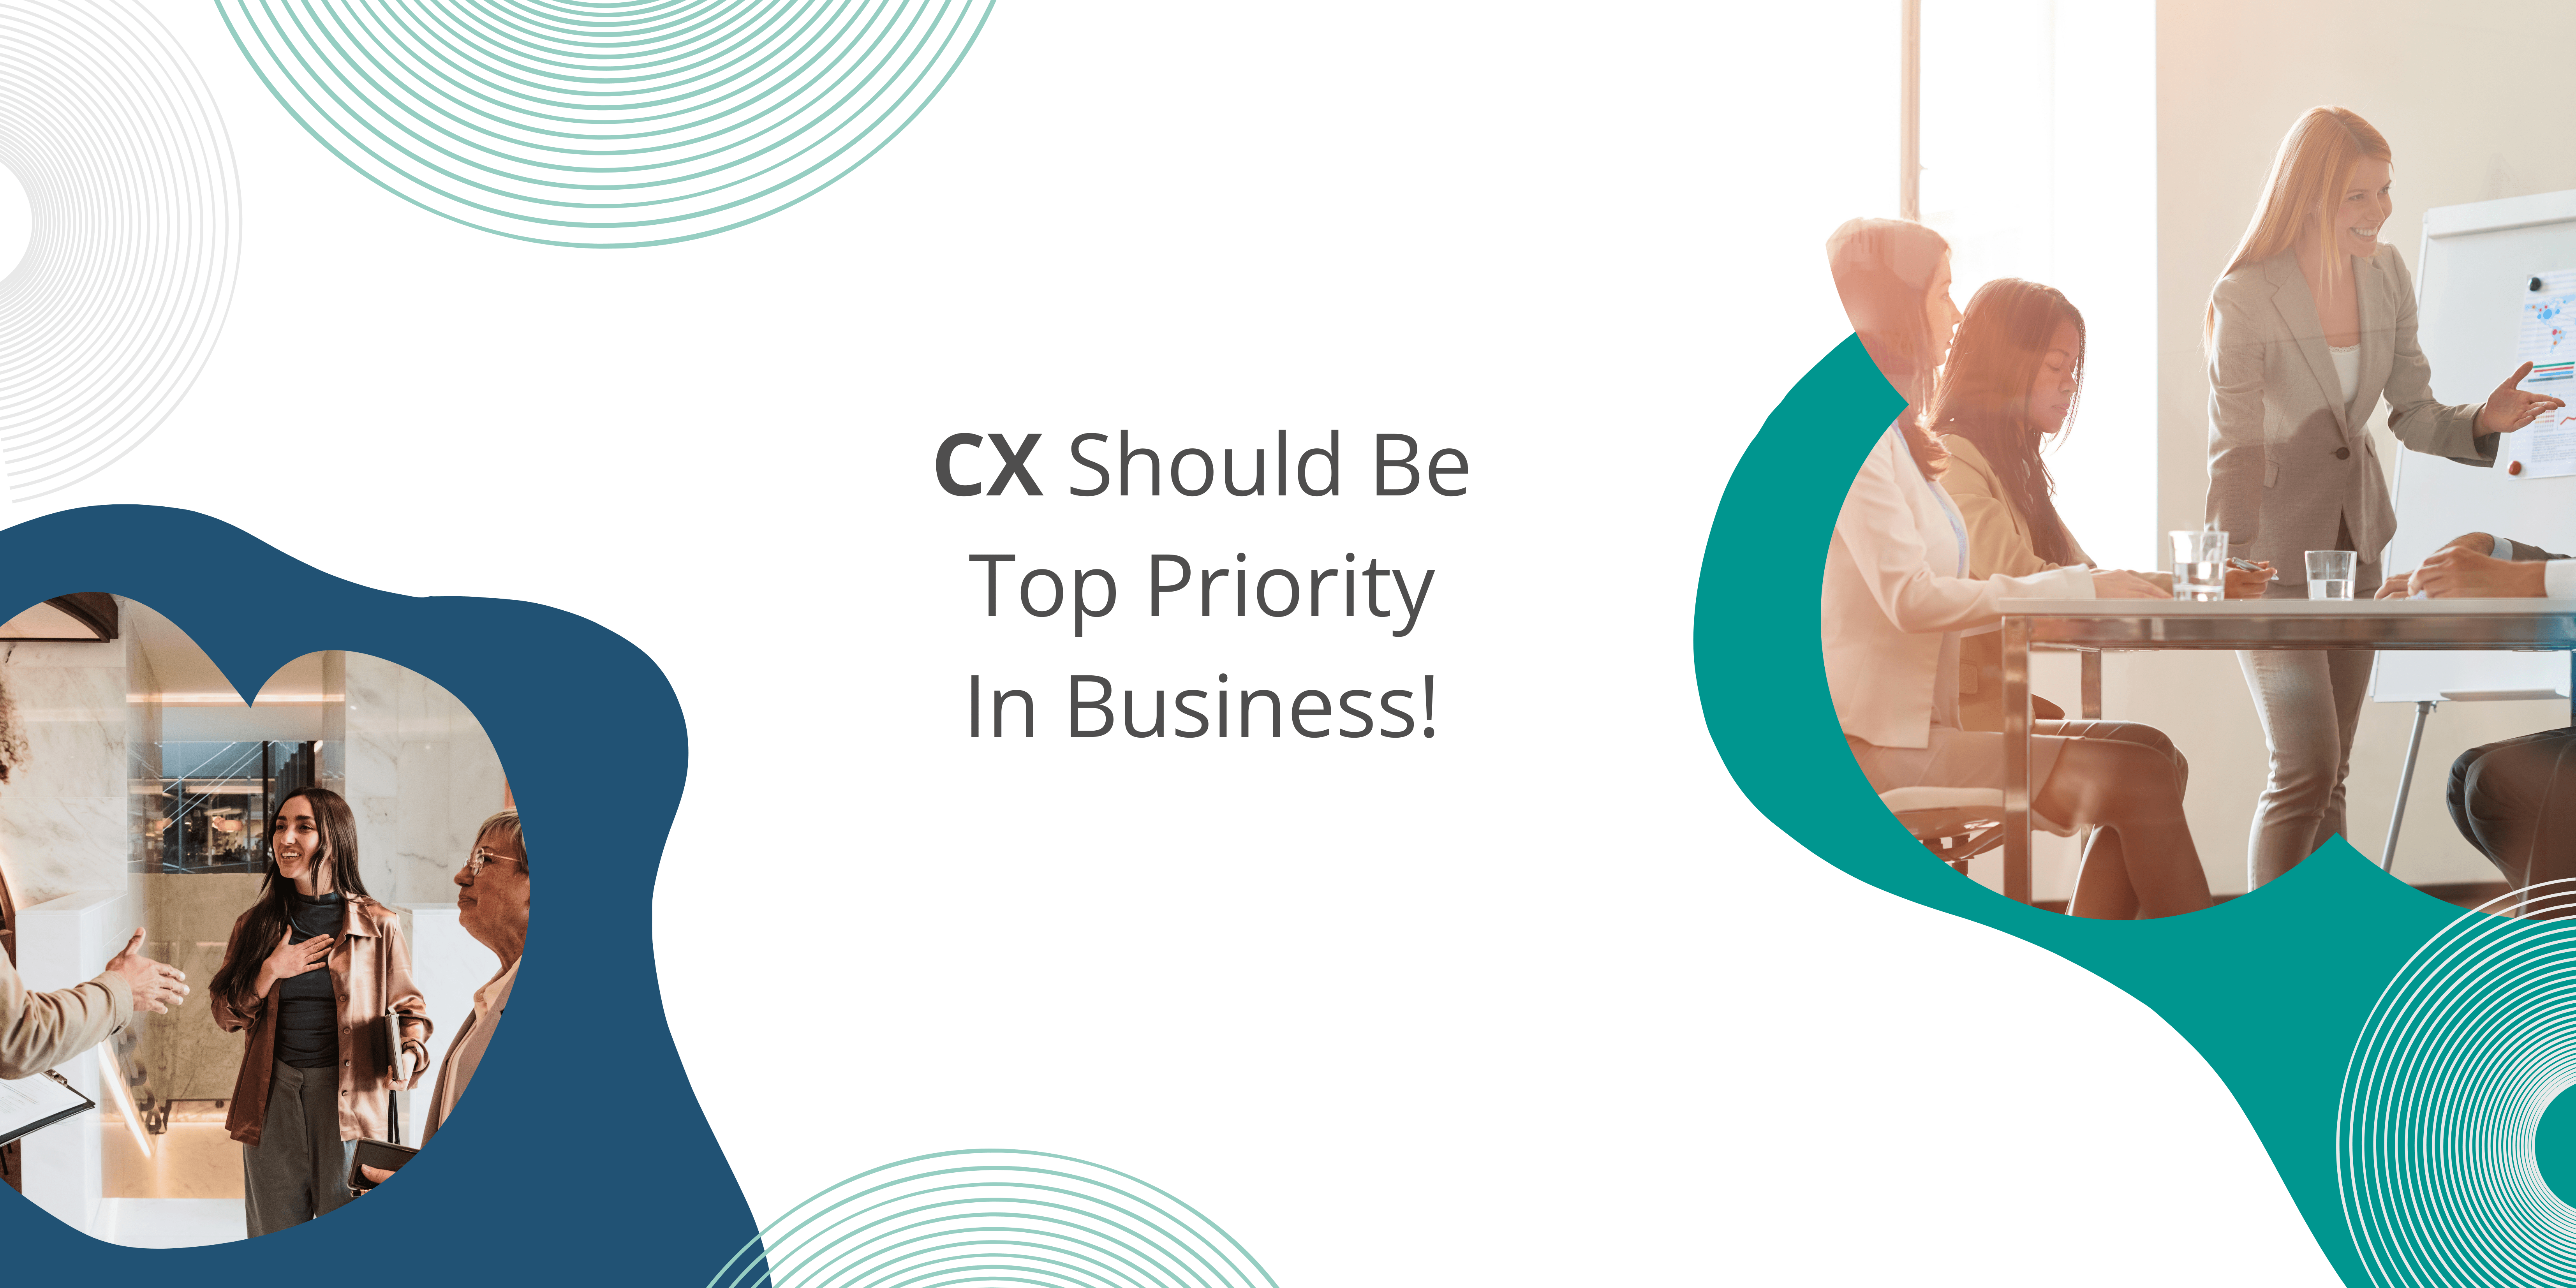 Trends for CX